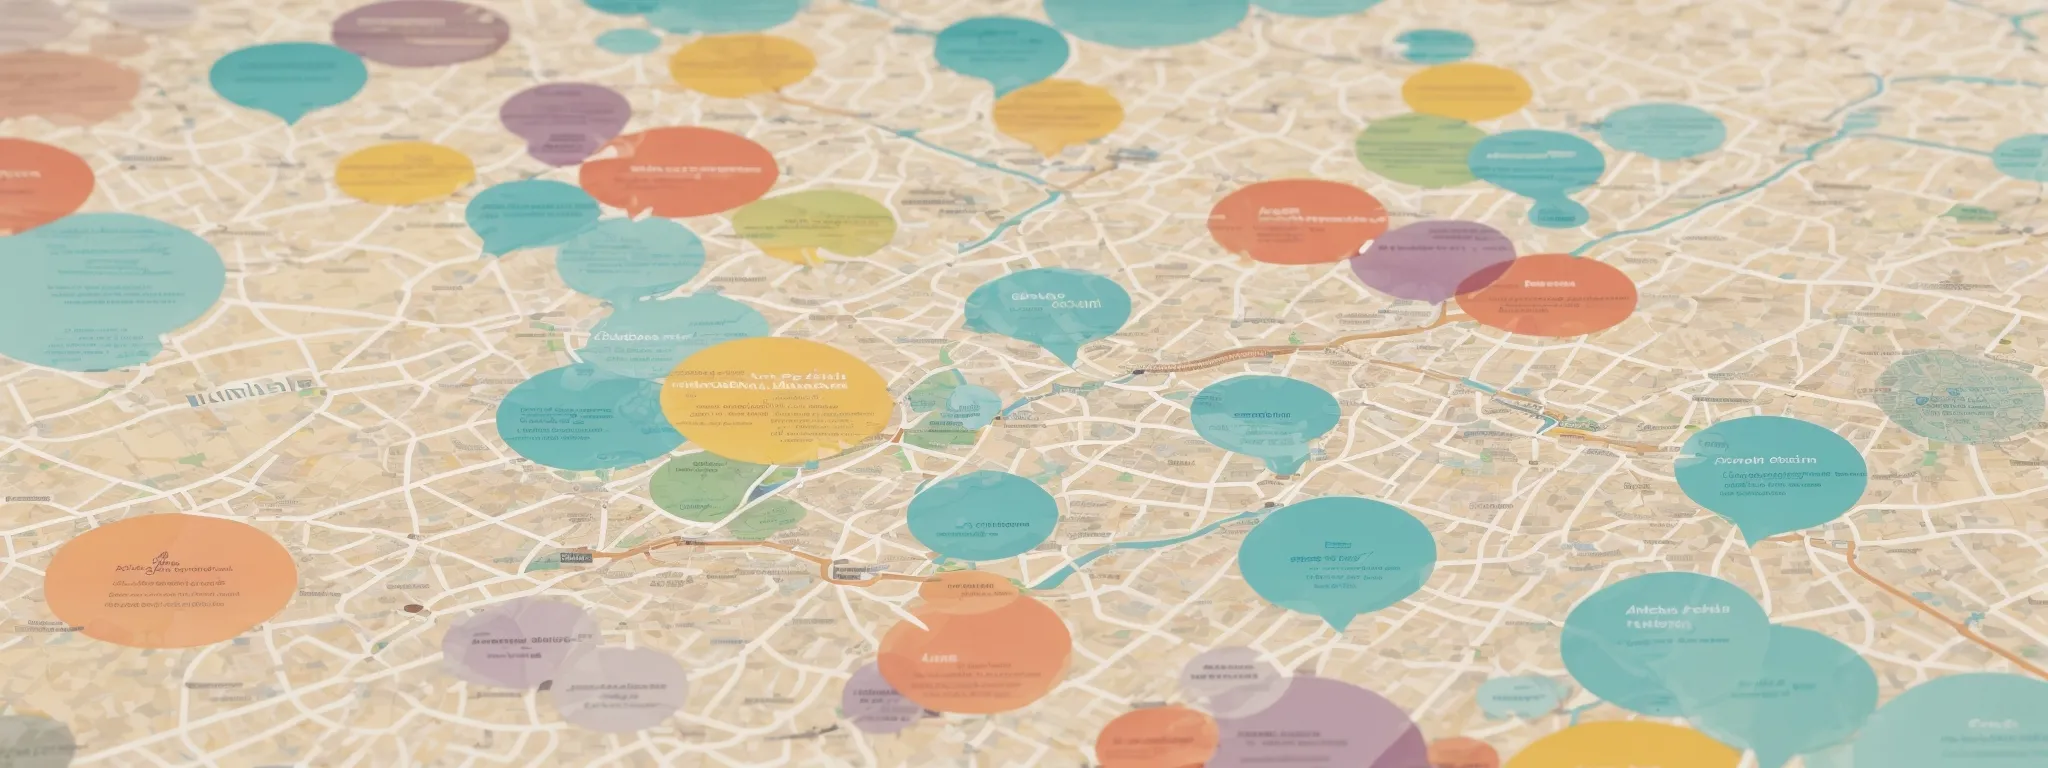 a colorful infographic map pinpointing local businesses with a magnifying glass highlighting network connections.